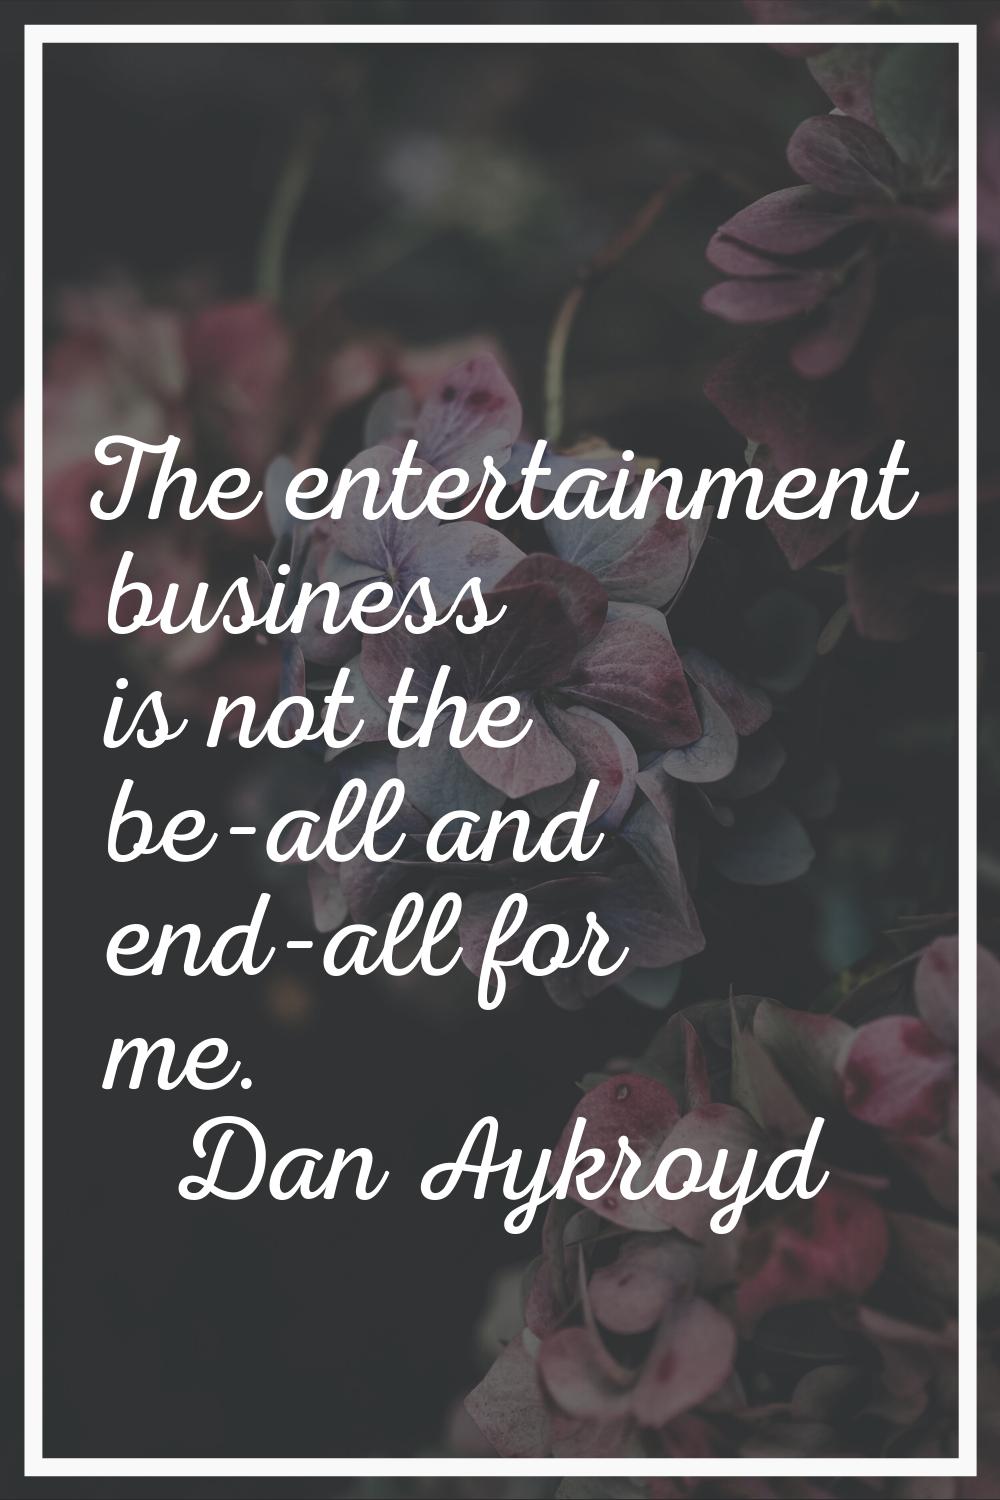 The entertainment business is not the be-all and end-all for me.